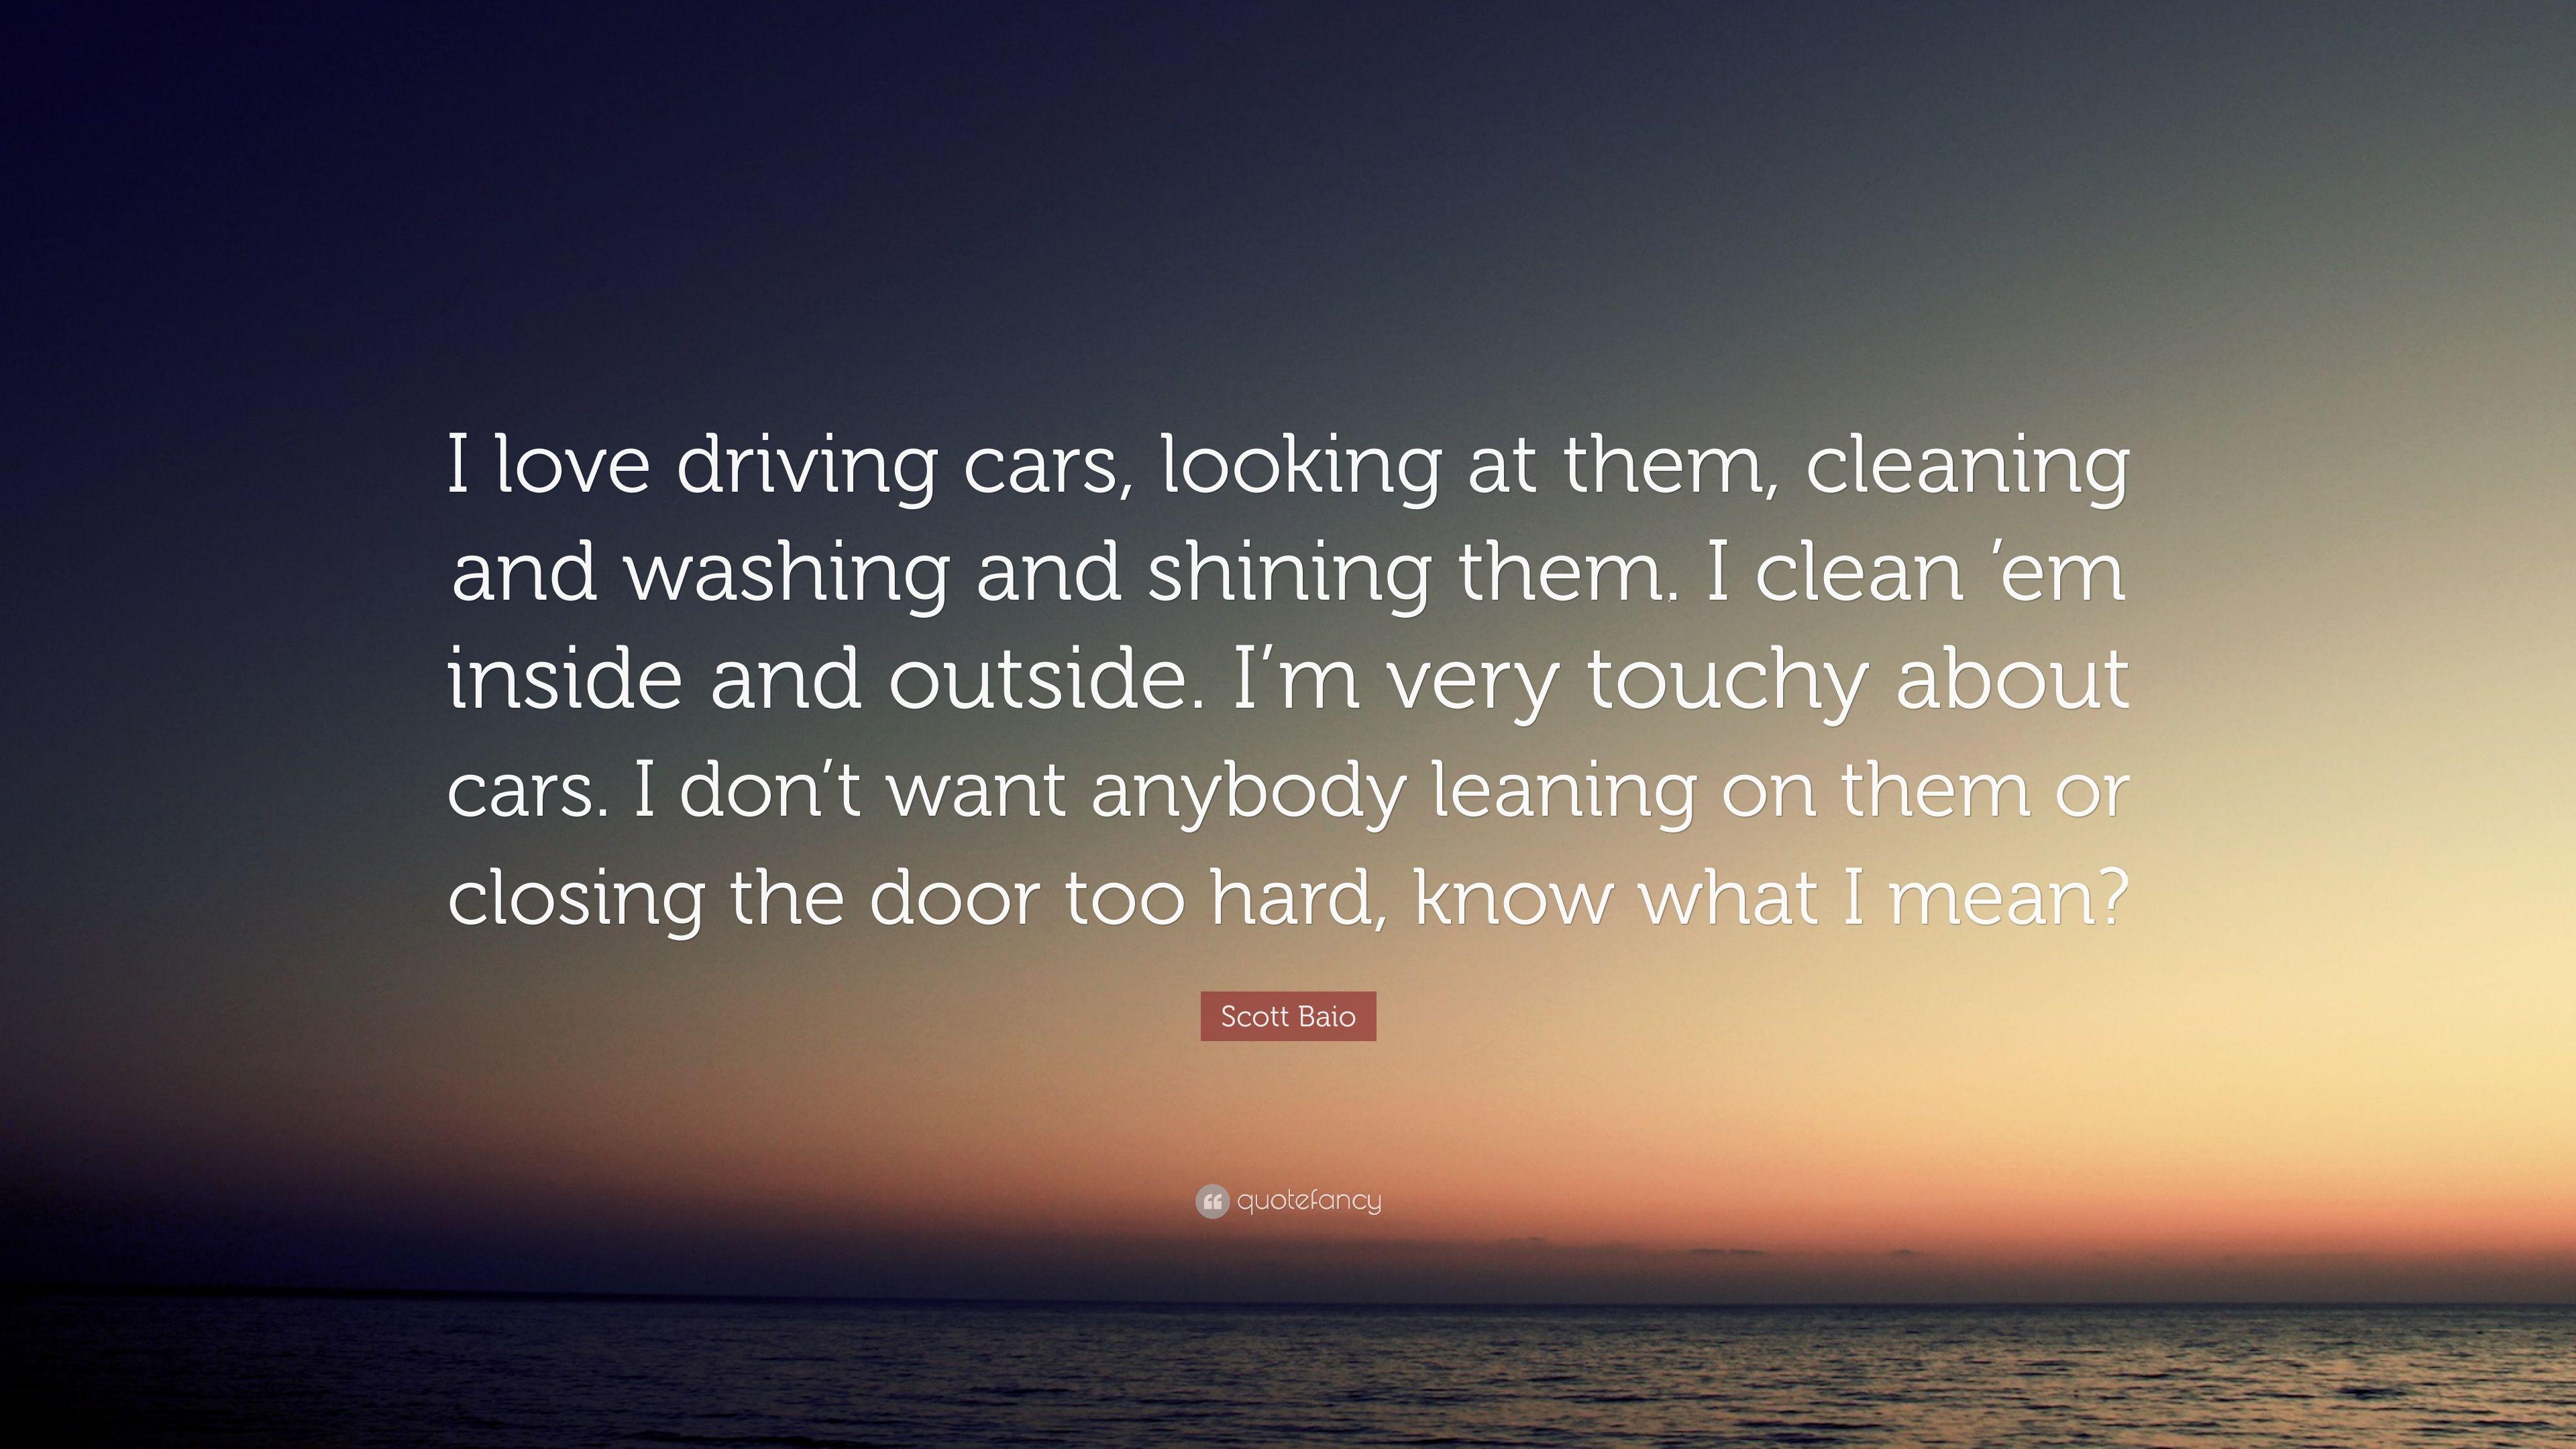 Scott Baio Quote: “I love driving cars, looking at them, cleaning